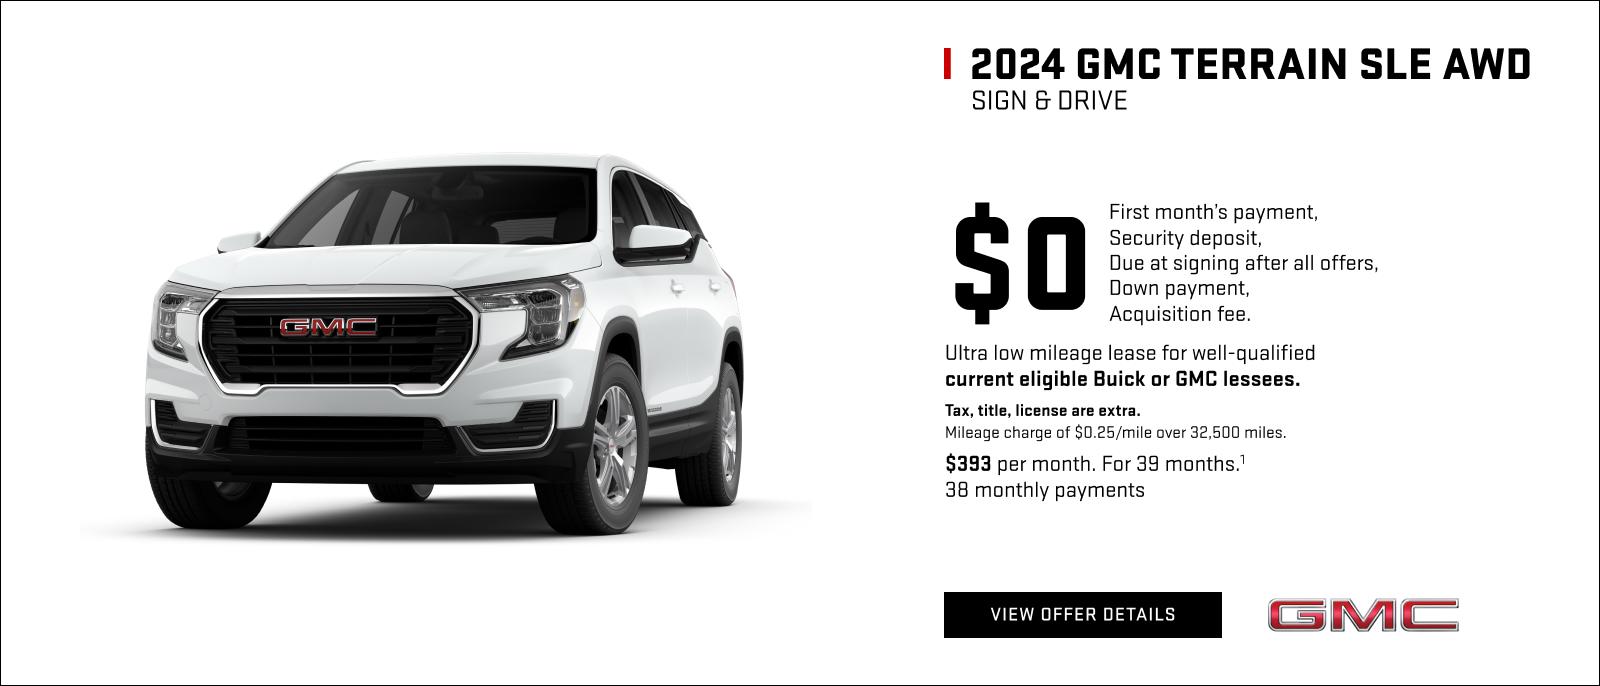 SIGN & DRIVE

$0
FIRST MONTH'S PAYMENT
SECURITY DEPOSIT
DUE AT LEASE SIGNING AFTER ALL OFFERS
DOWN PAYMENT
ACQUISITION FEE

Ultra low mileage lease for well-qualified current eligible Buick or GMC lessees.

Tax, title, license are extra. Mileage charge of $0.25/mile over 32,500 miles.

$393 per month. For 39 months.1
38 monthly payments